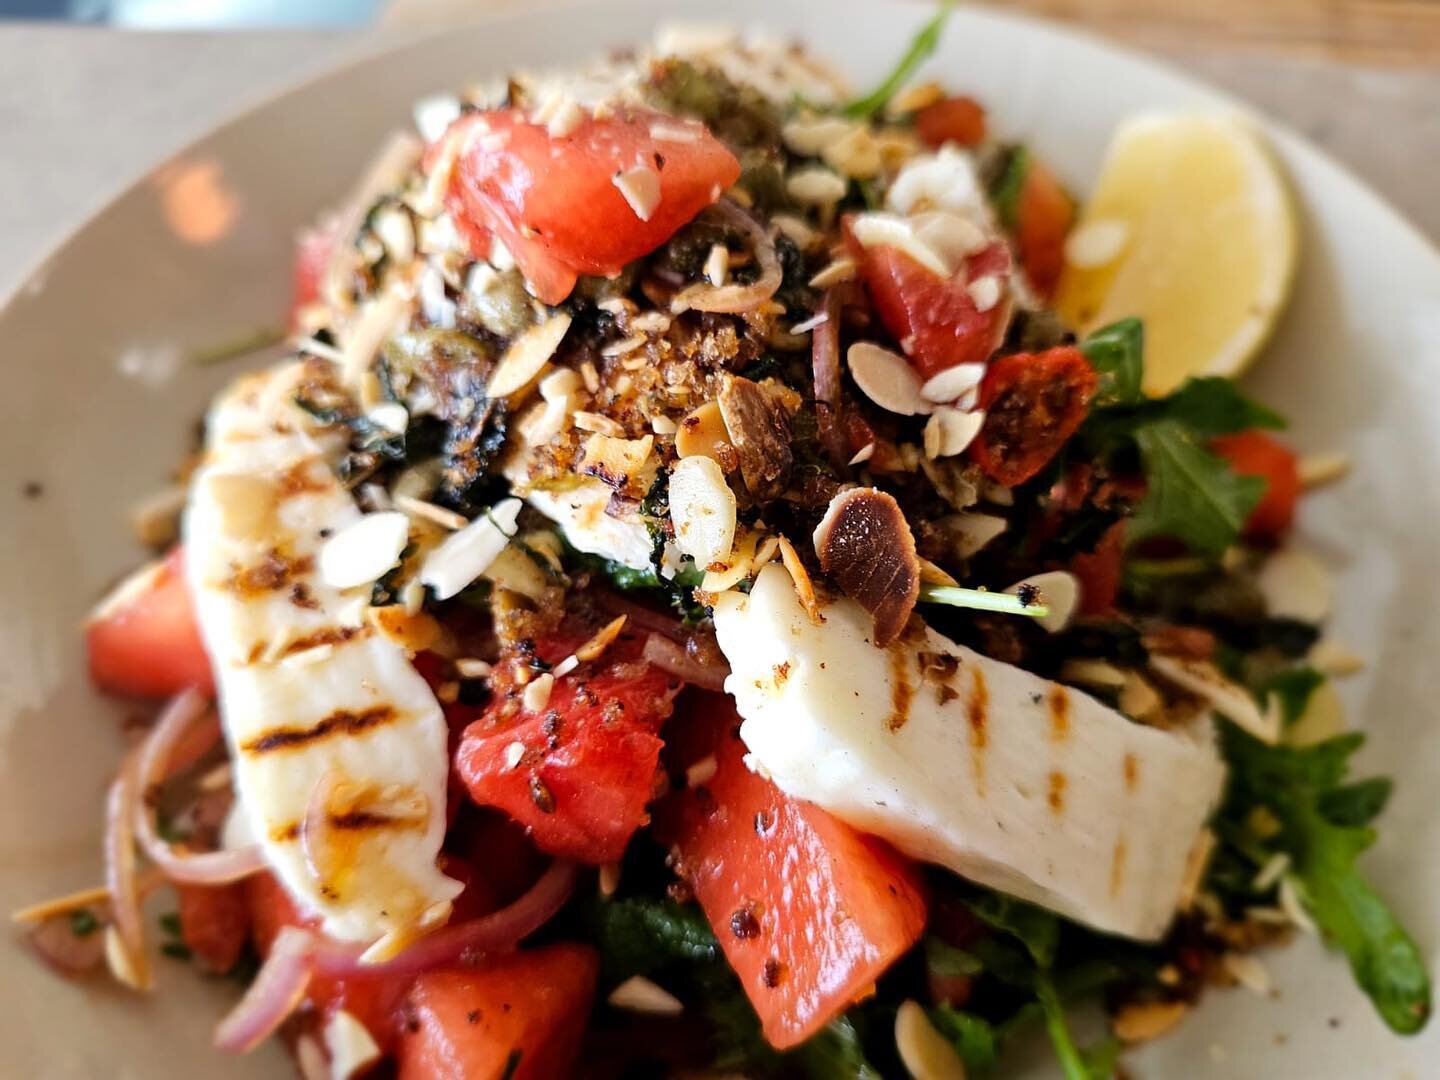 GORGEOUS SPECIAL!
On the board tomorrow:

Grilled halloumi, watermelon, mint, rocket and shallot salad with almond, chilli and caper pangrattato and balsamic dressing.
.
Come and grab it before it all goes!